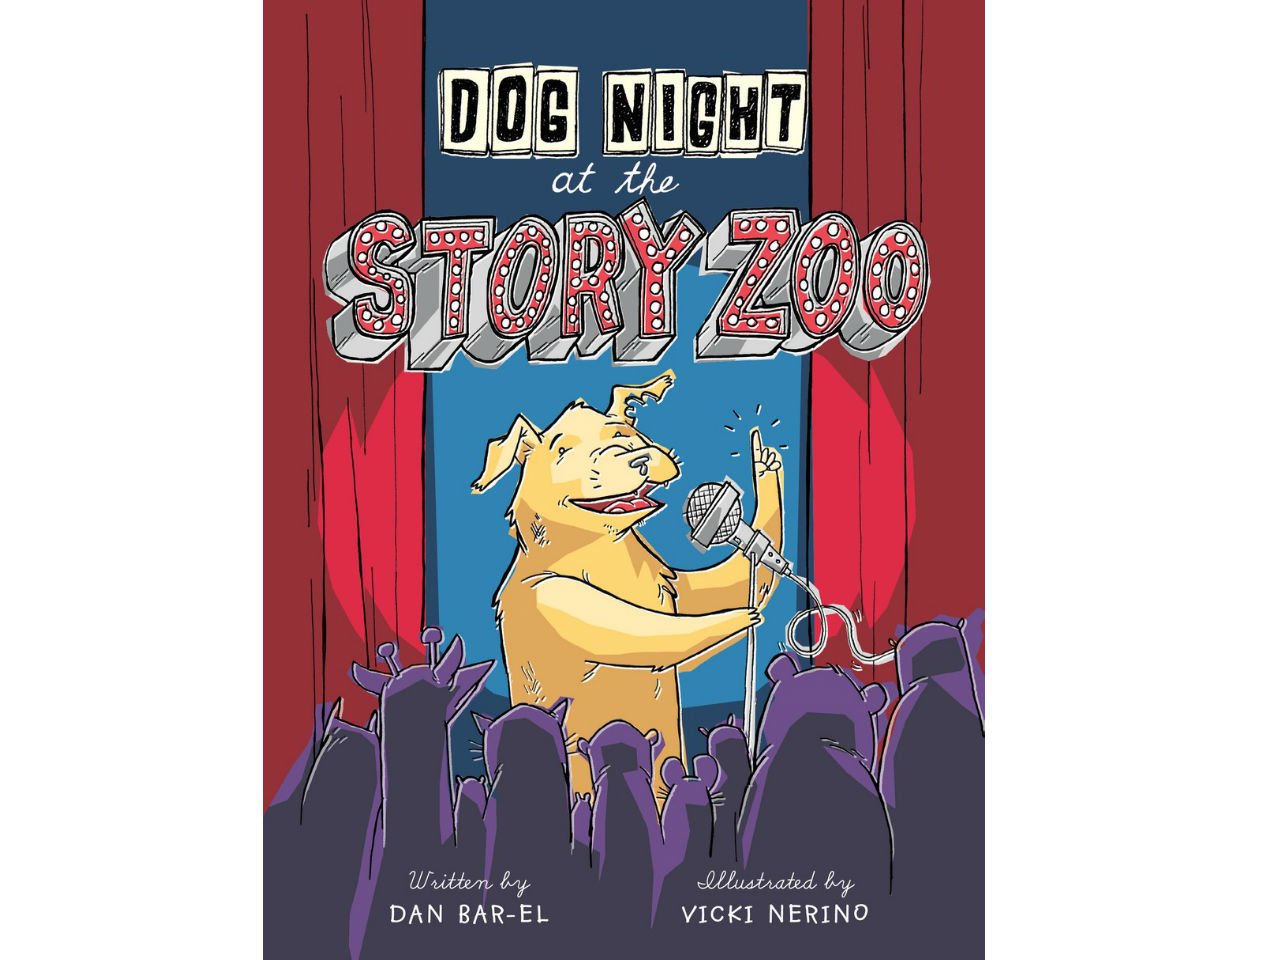 book cover with a dog on stage doing stand up